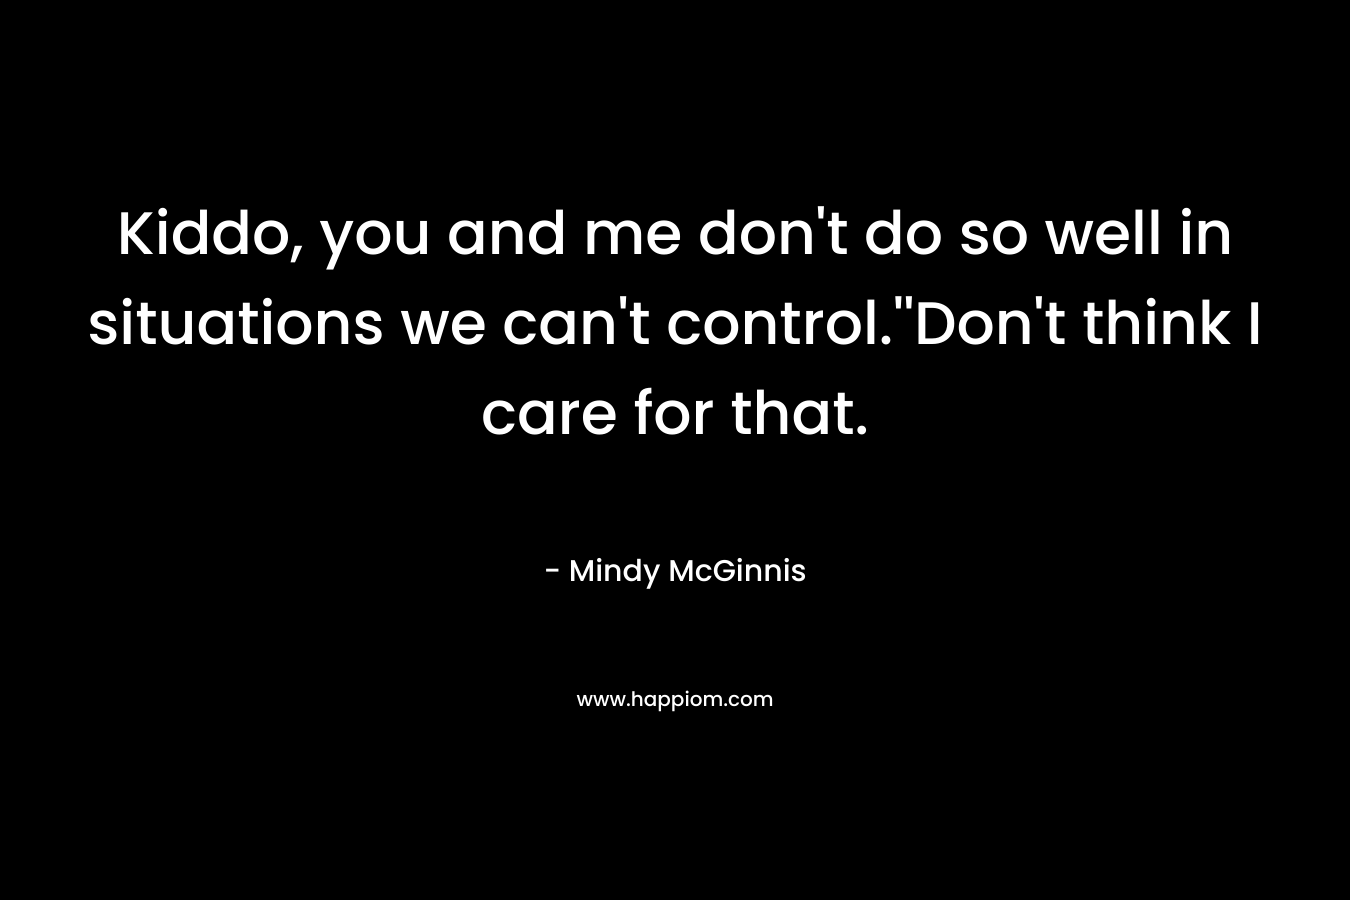 Kiddo, you and me don’t do so well in situations we can’t control.”Don’t think I care for that. – Mindy McGinnis